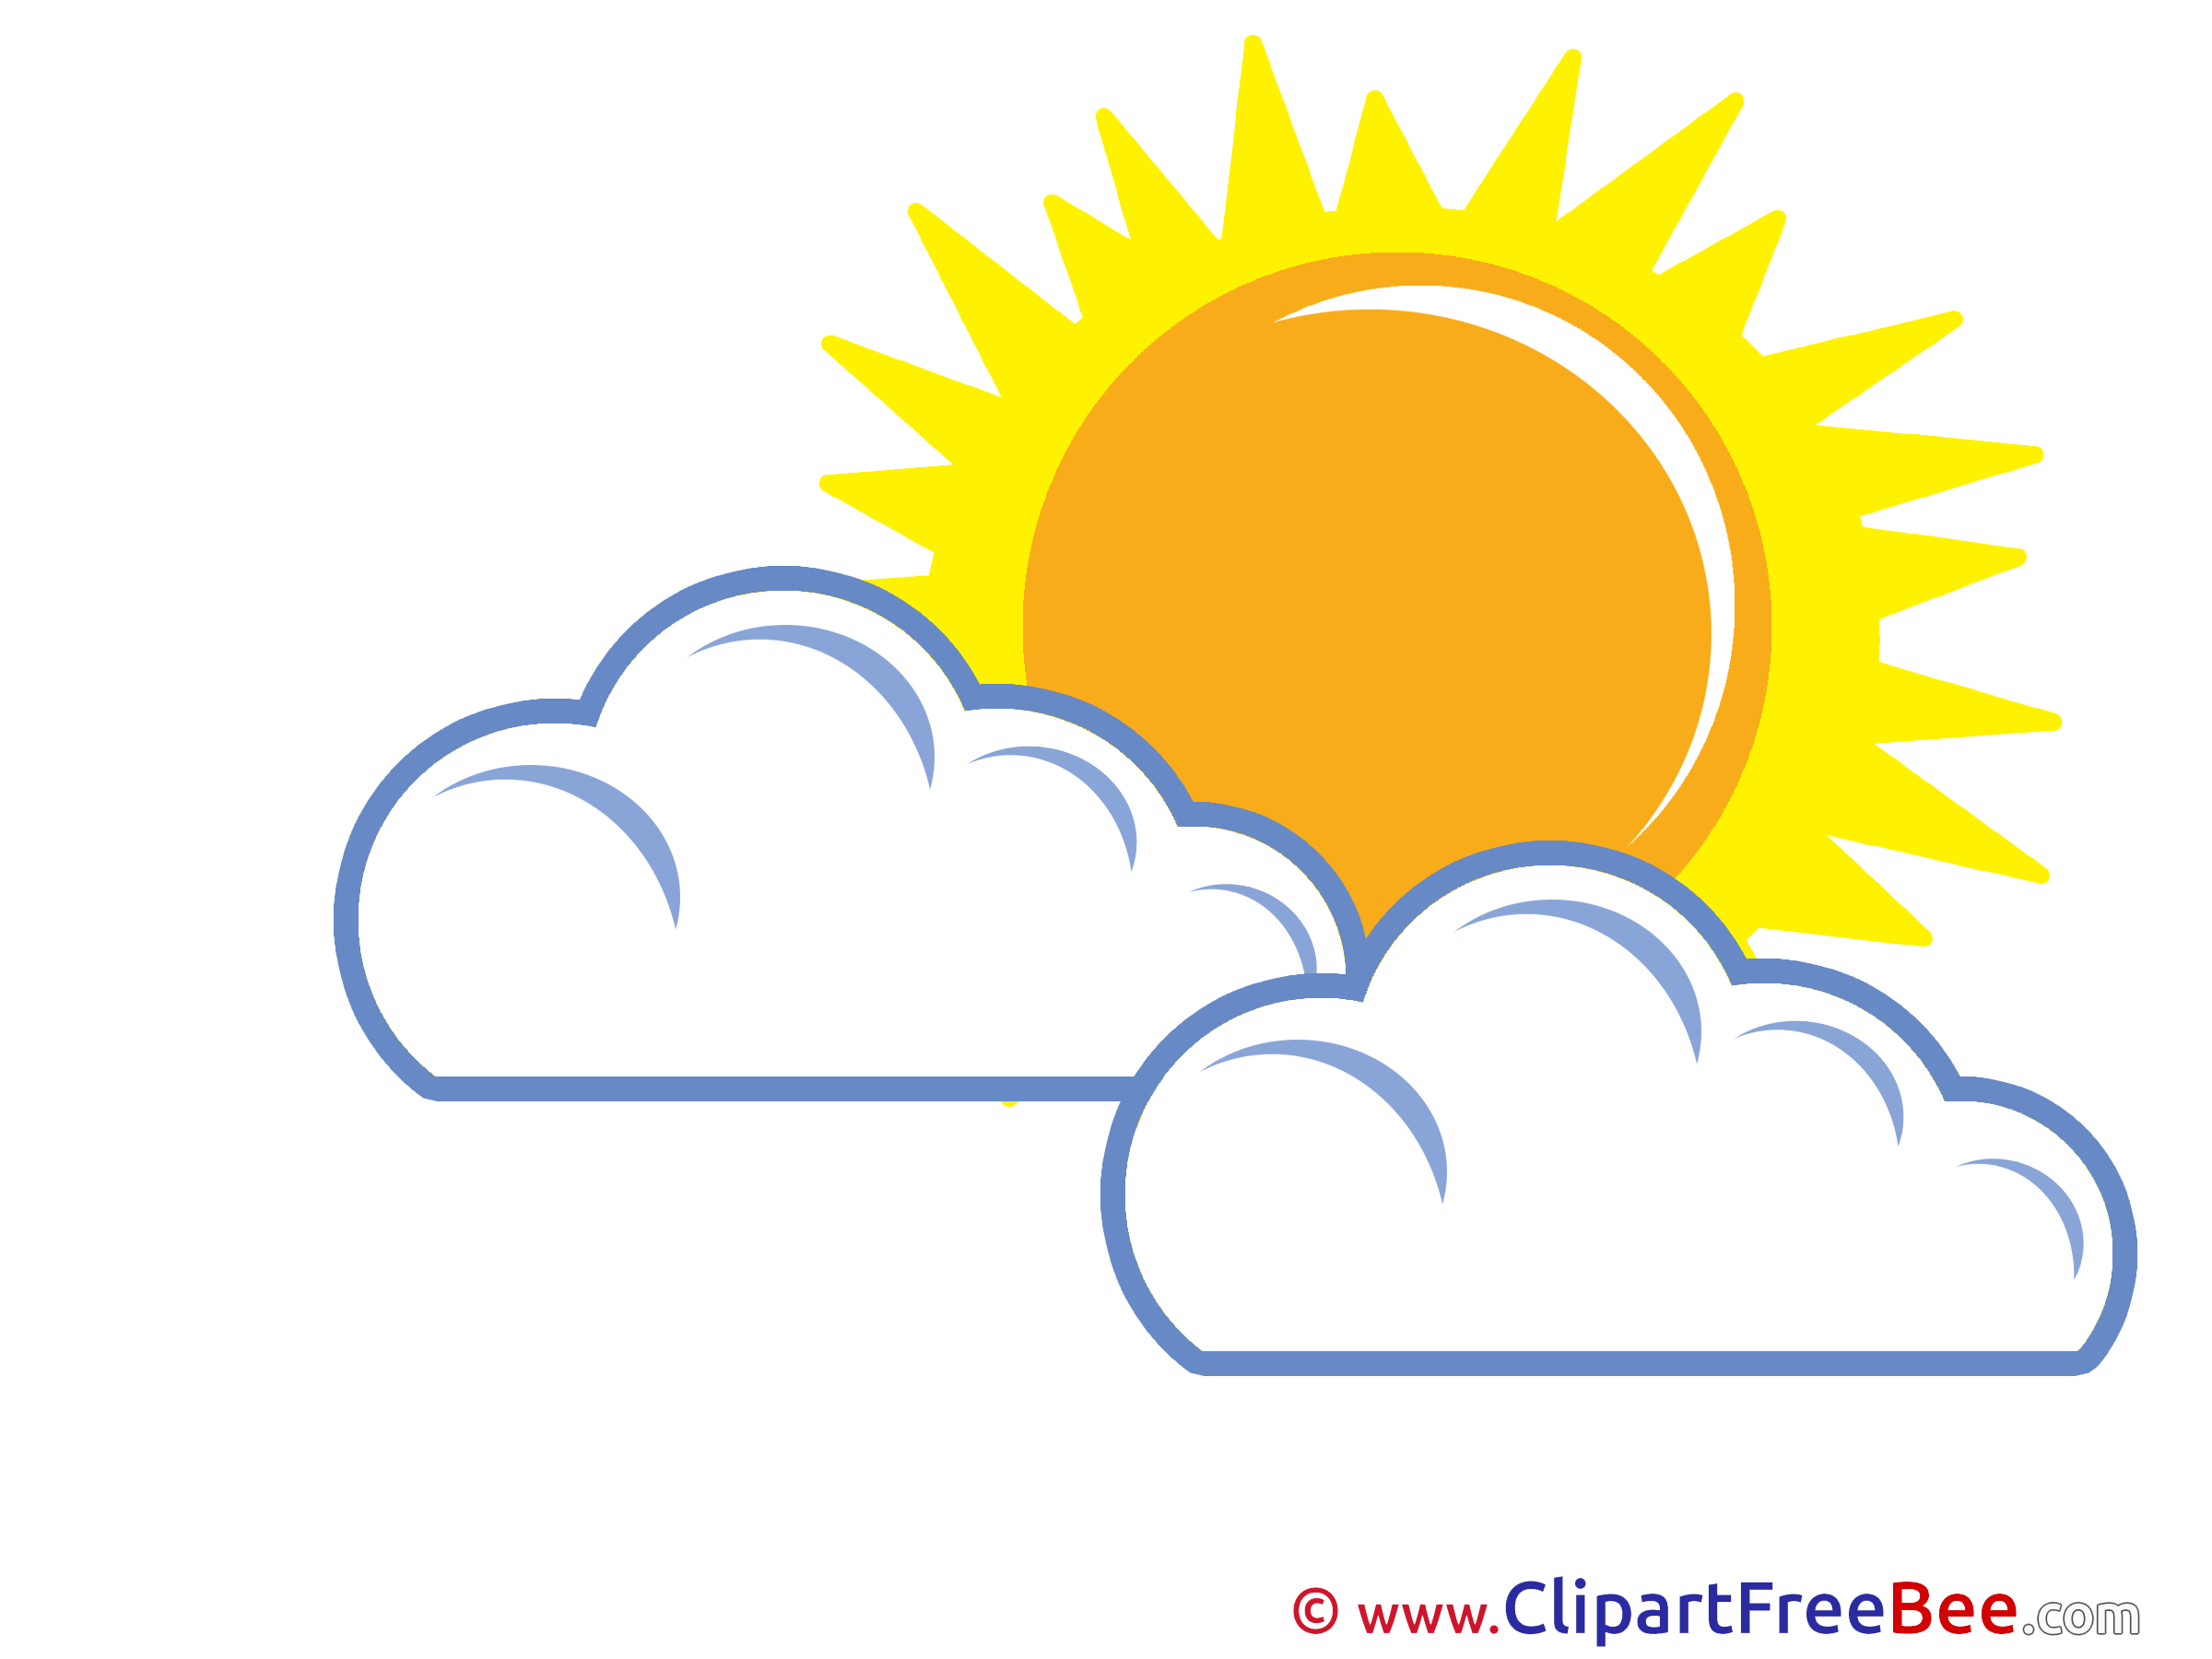 Warm Weather Sun Clouds Clipart free Illustrations